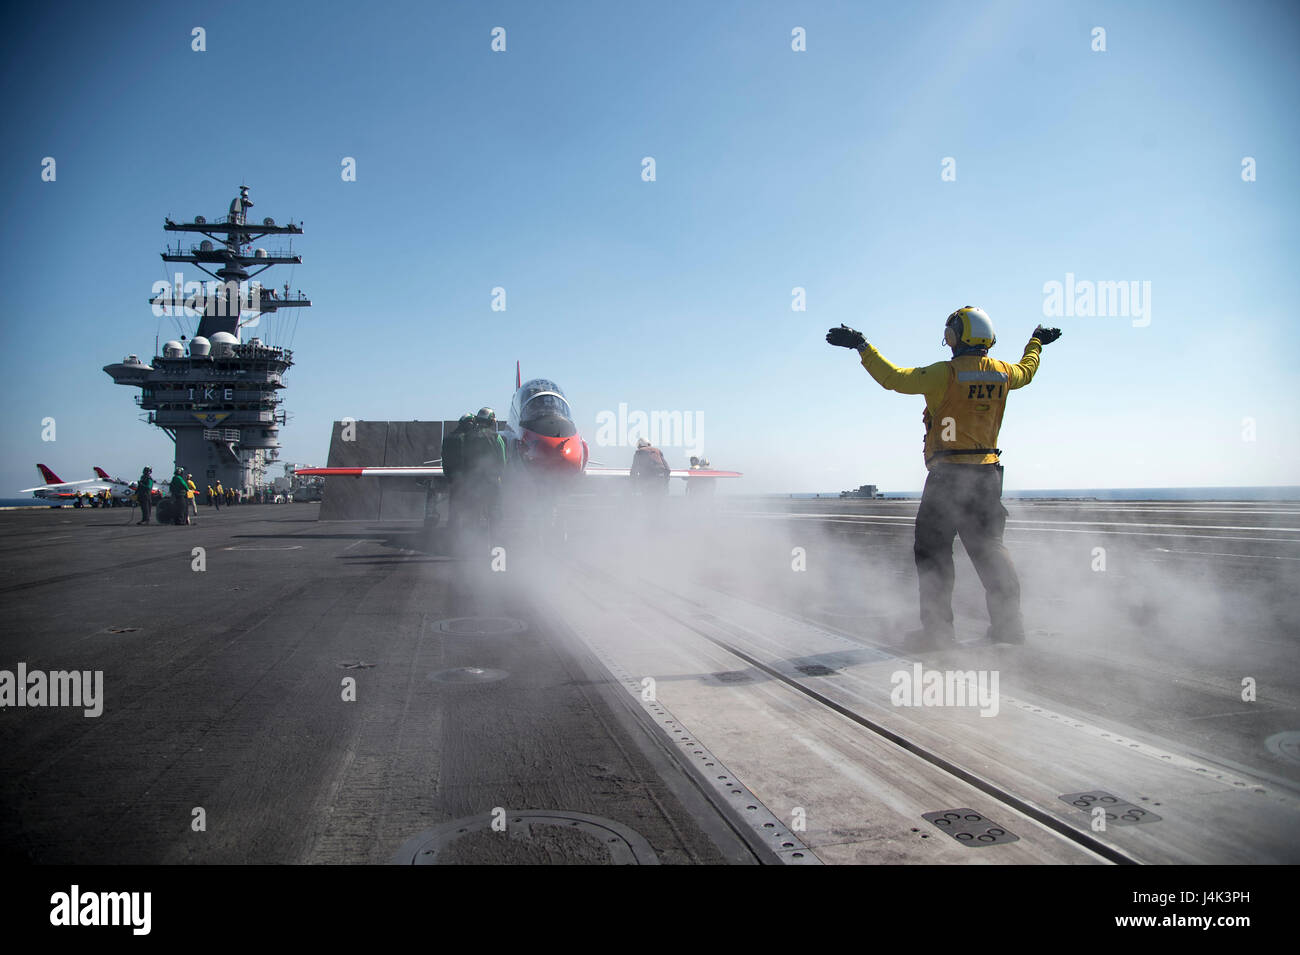 170209-N-OS569-403 ATLANTIC OCEAN (Feb. 9, 2017) A T-45C Goshawk training aircraft assigned to Carrier Training Wing (CTW) 2 taxis onto the catapult aboard the aircraft carrier USS Dwight D. Eisenhower (CVN 69). The ship is conducting aircraft carrier qualifications during the sustainment phase of the Optimized Fleet Response Plan. (U.S. Navy photo by Mass Communication Specialist Seaman Zach Sleeper/Released) Stock Photo